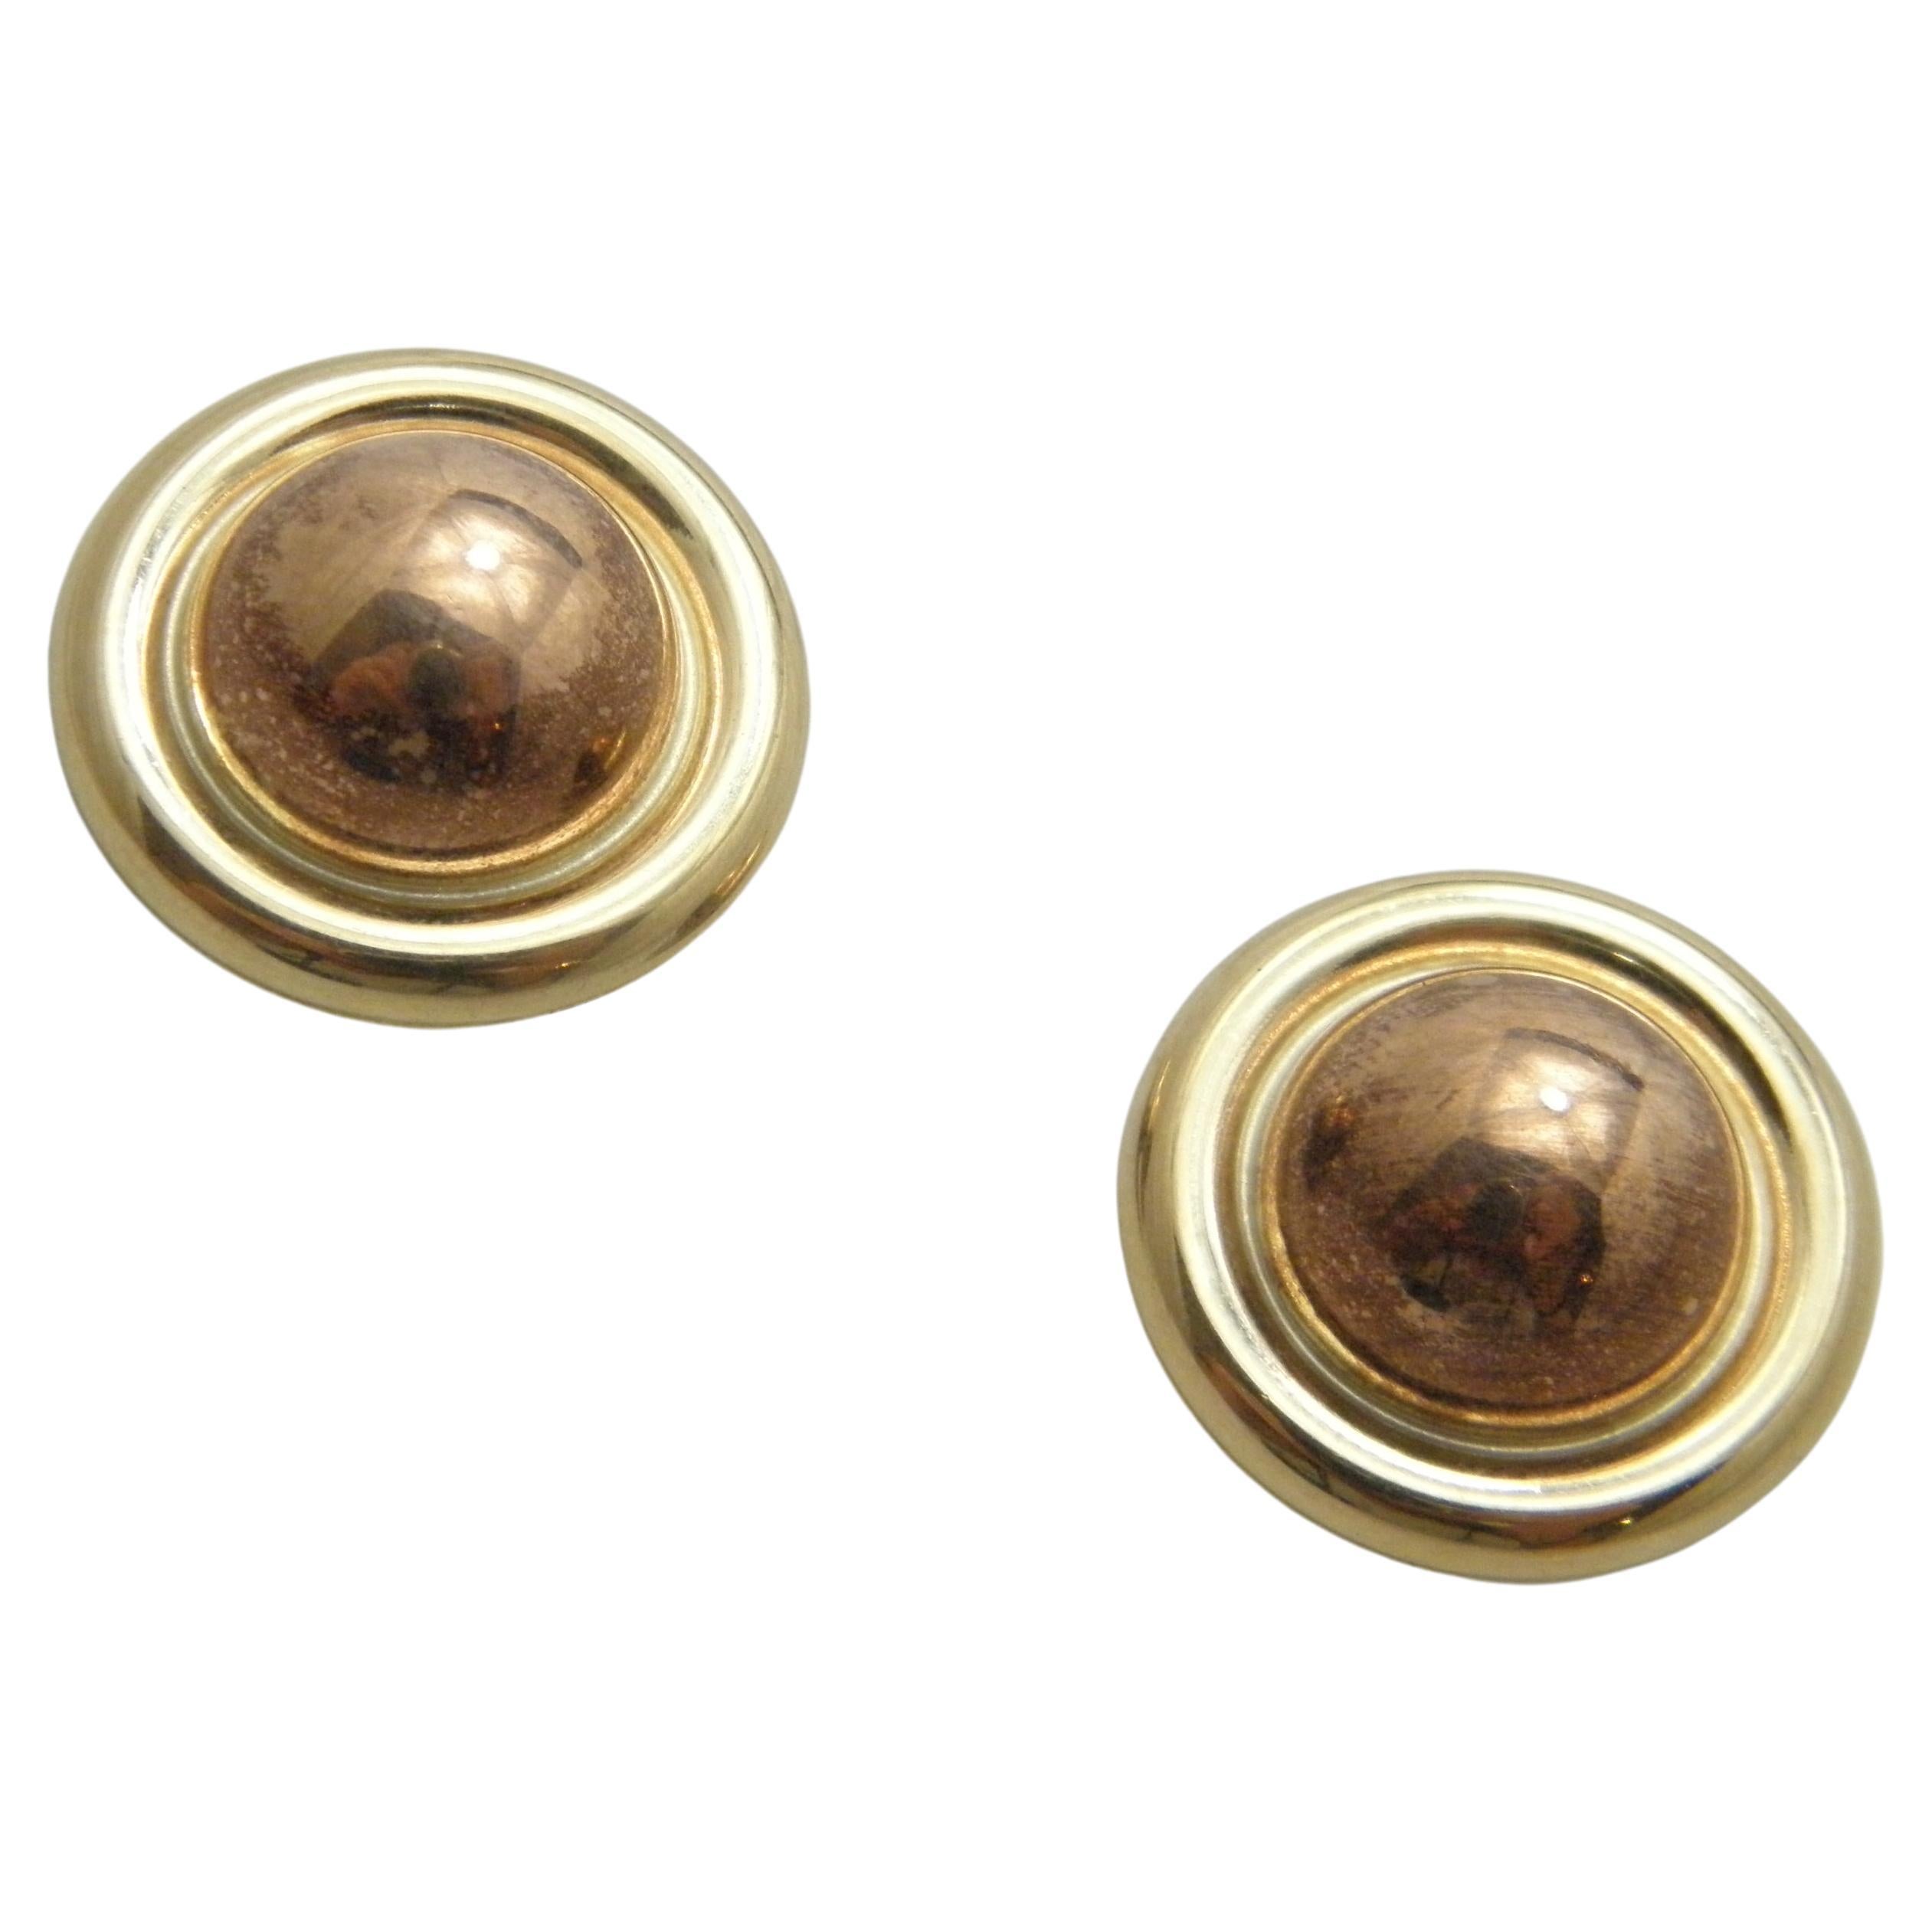 Vintage 9ct Gold Massive Ball Stud Earrings 375 Purity VGC Heavy For Sale